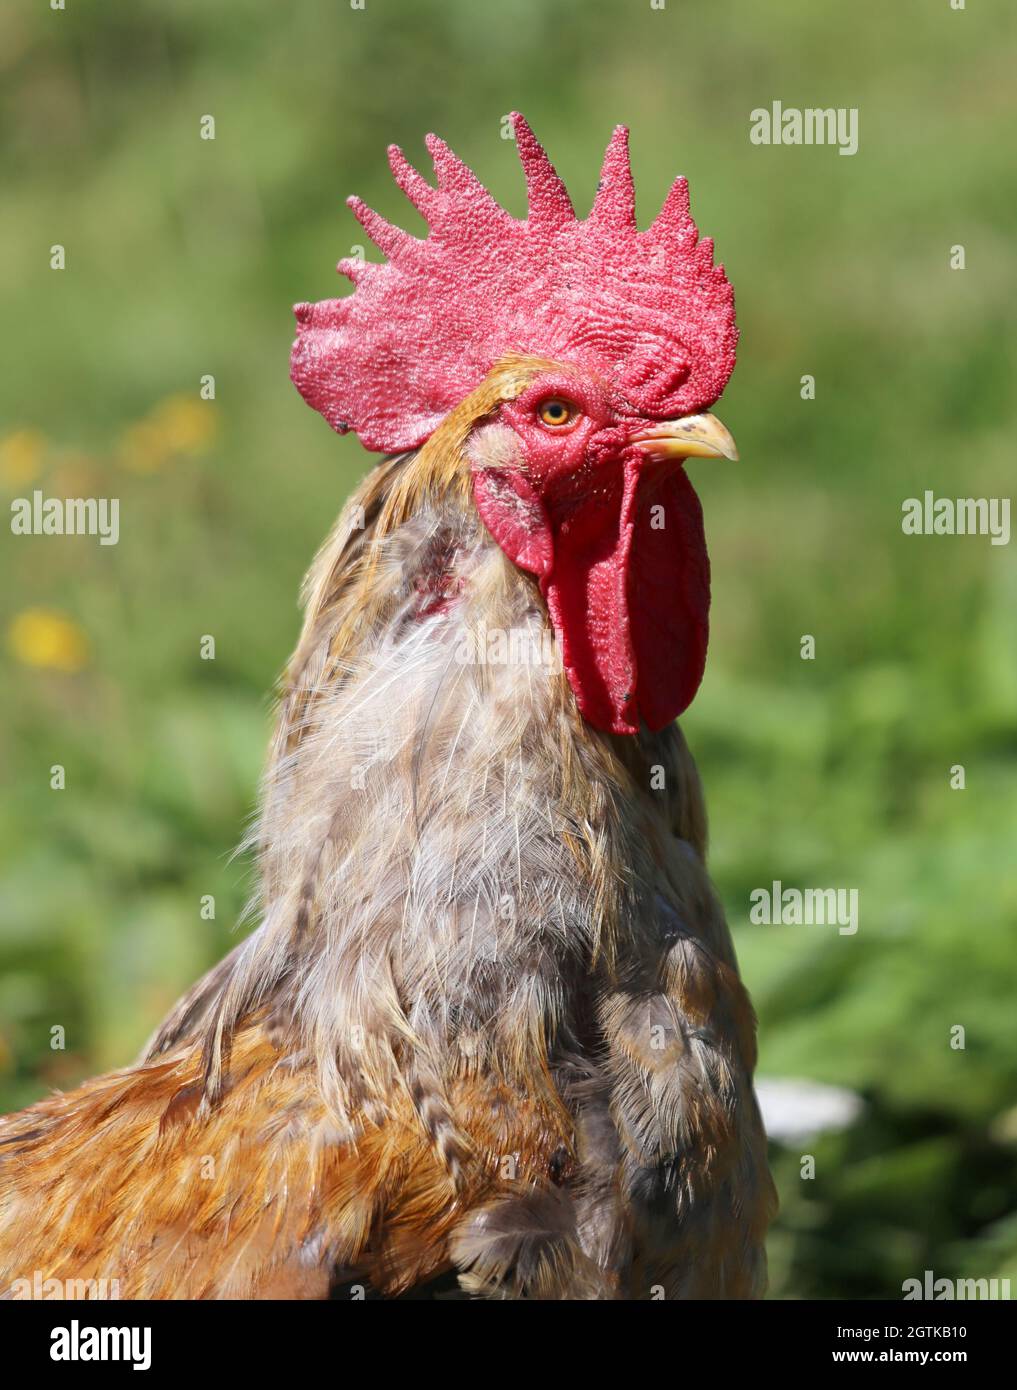 Close Portrait Of A Big Rooster With The Red Comb On The Head Stock Photo